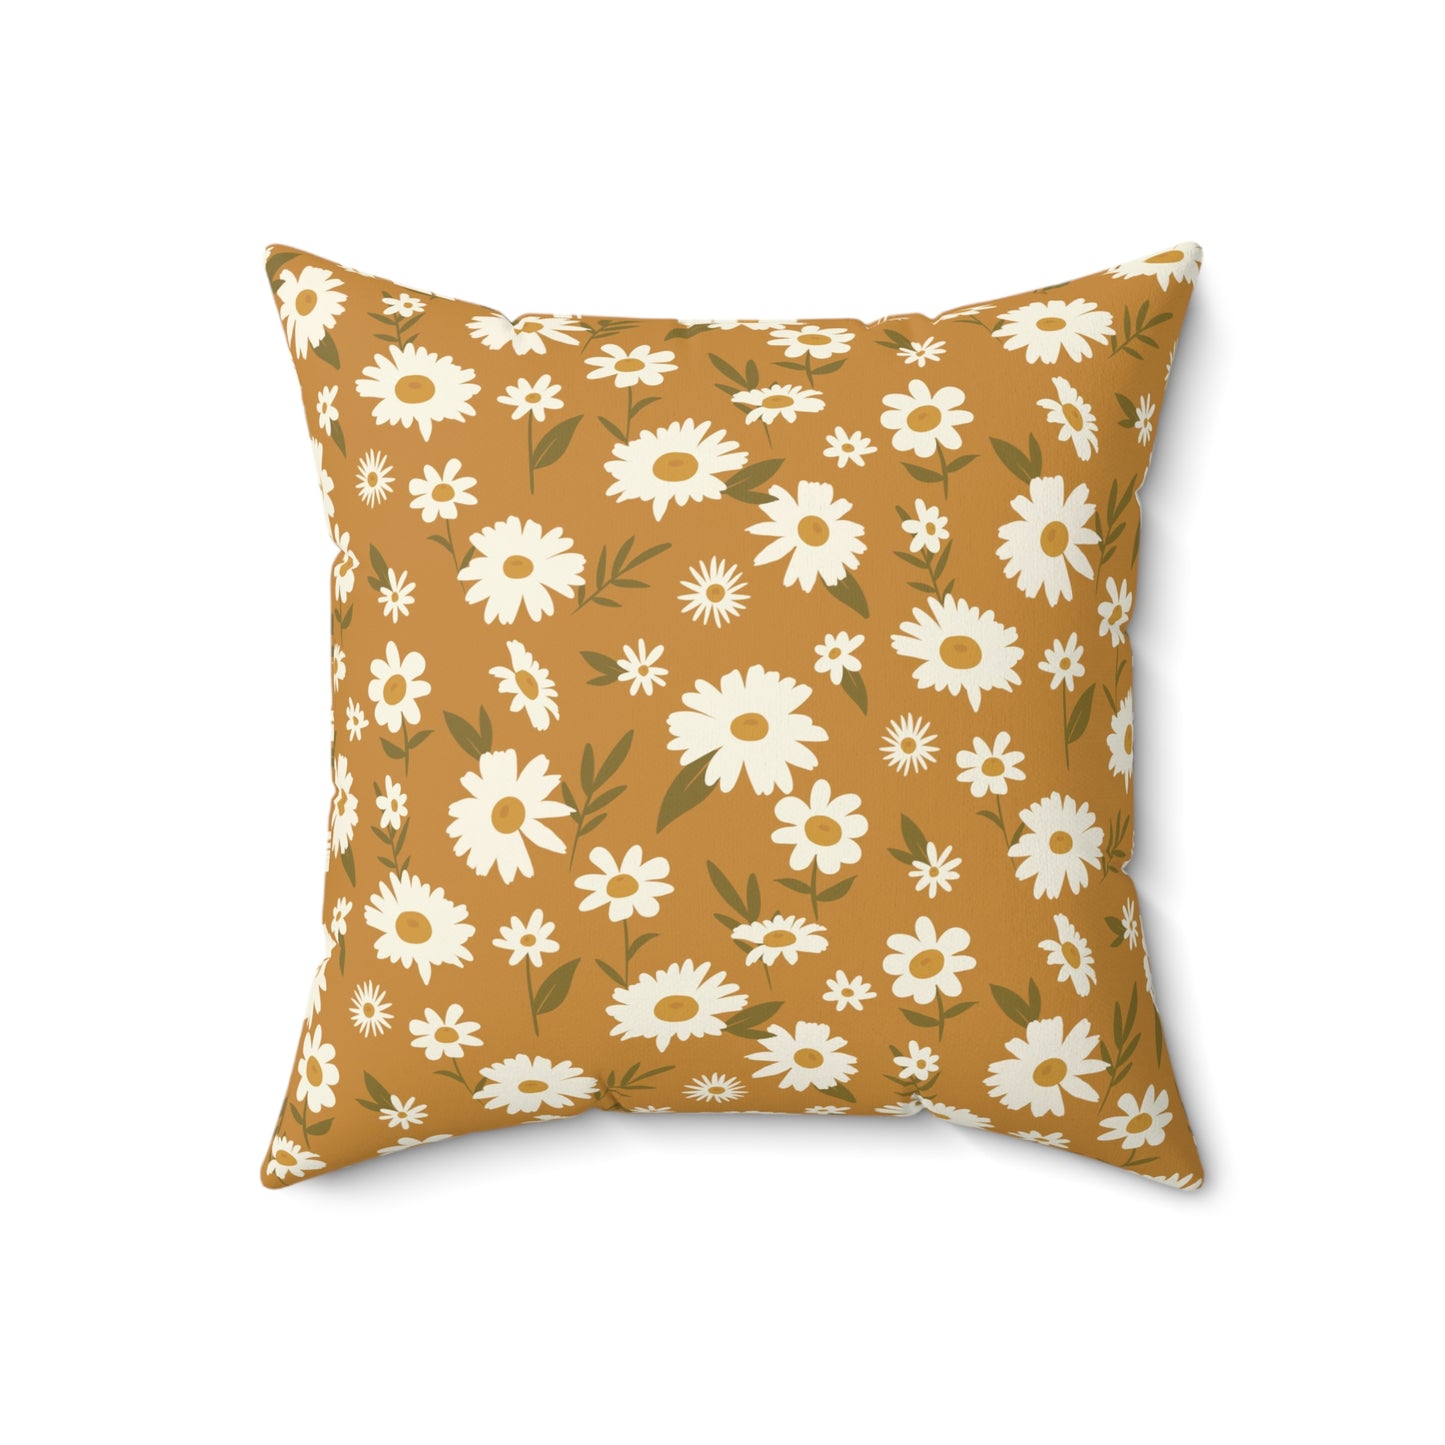 Golden Daisies Square Pillow